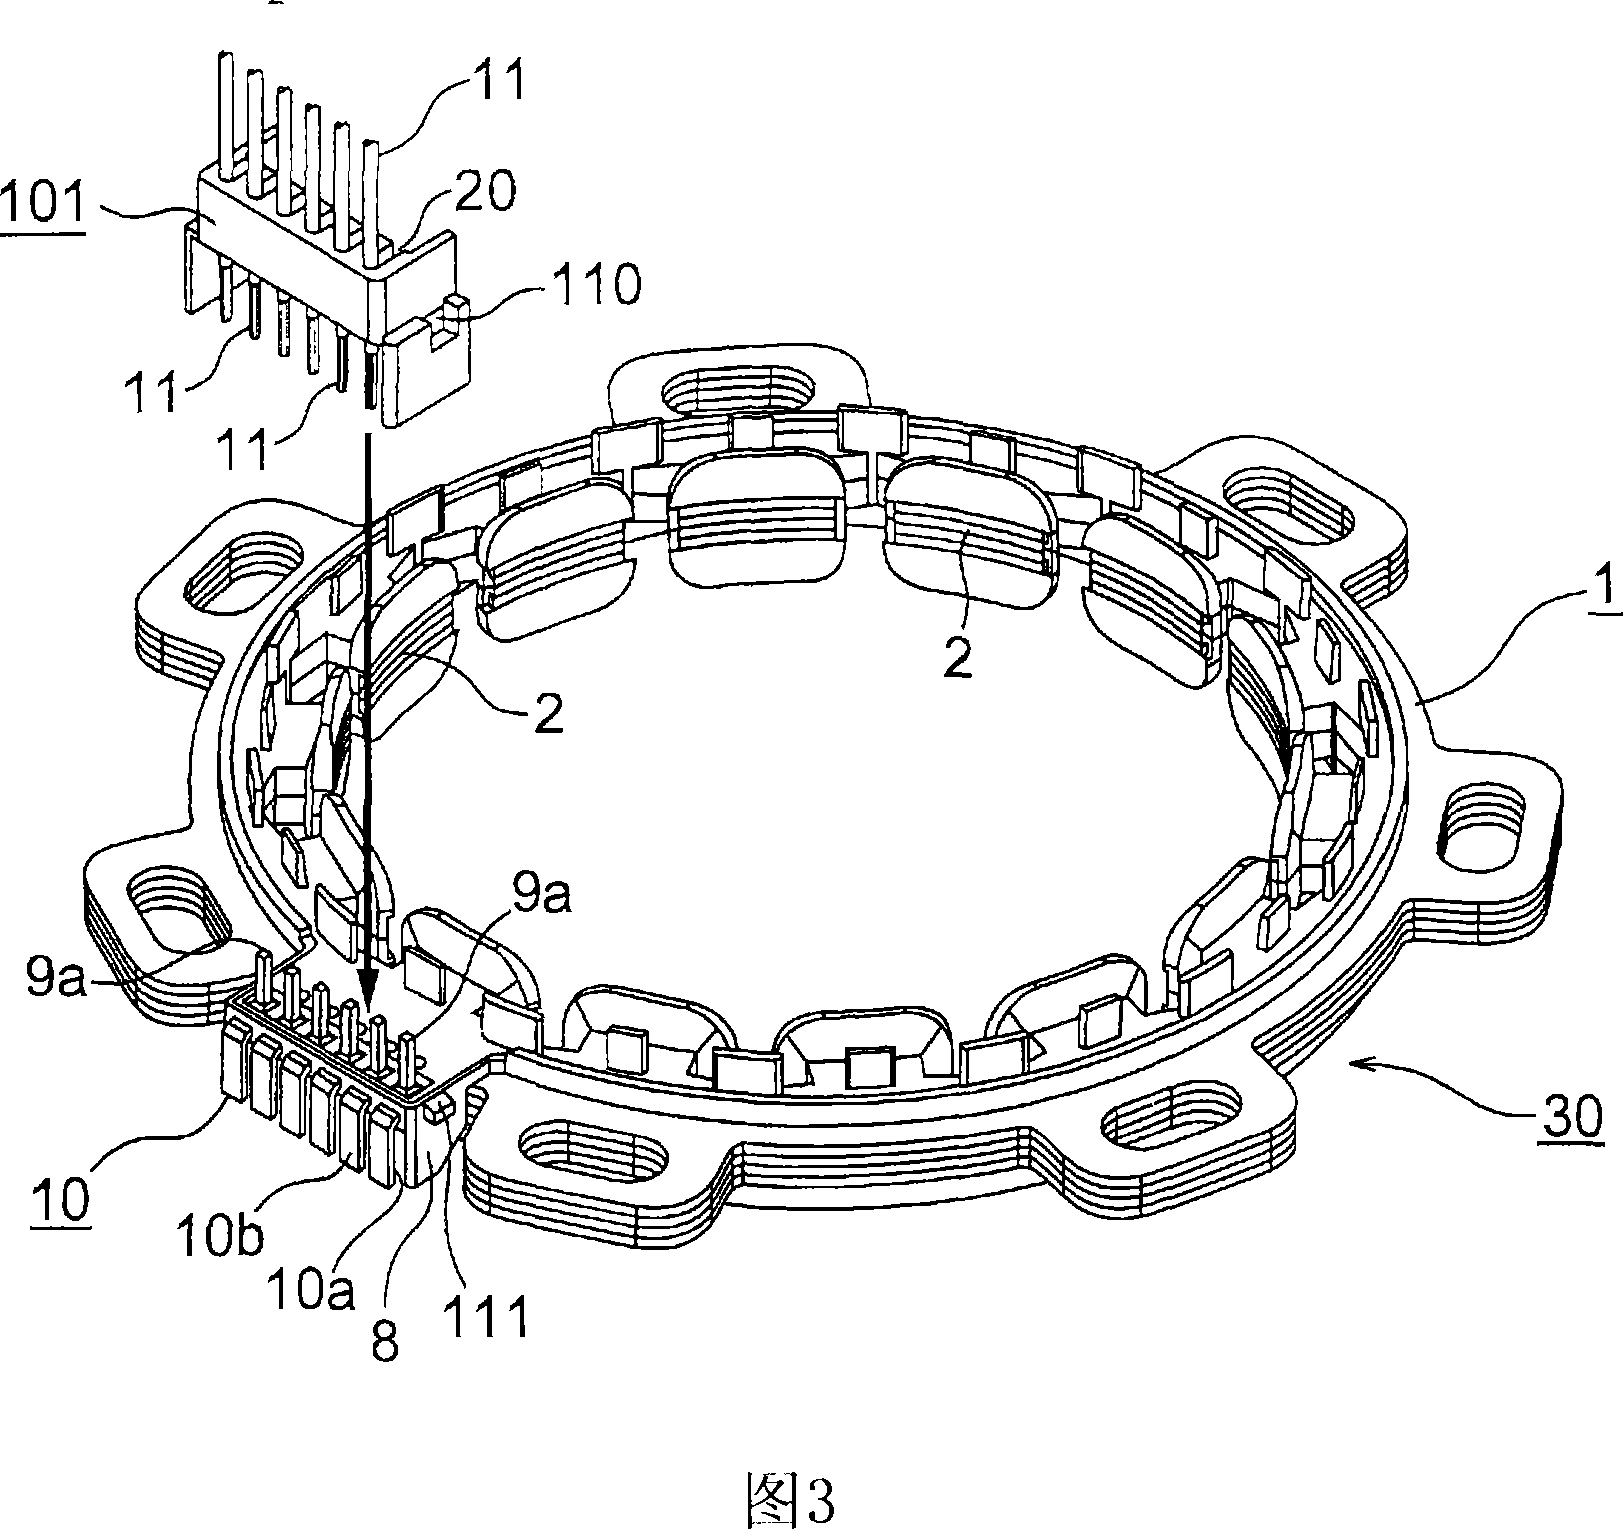 Resolver external conductor fixing structure